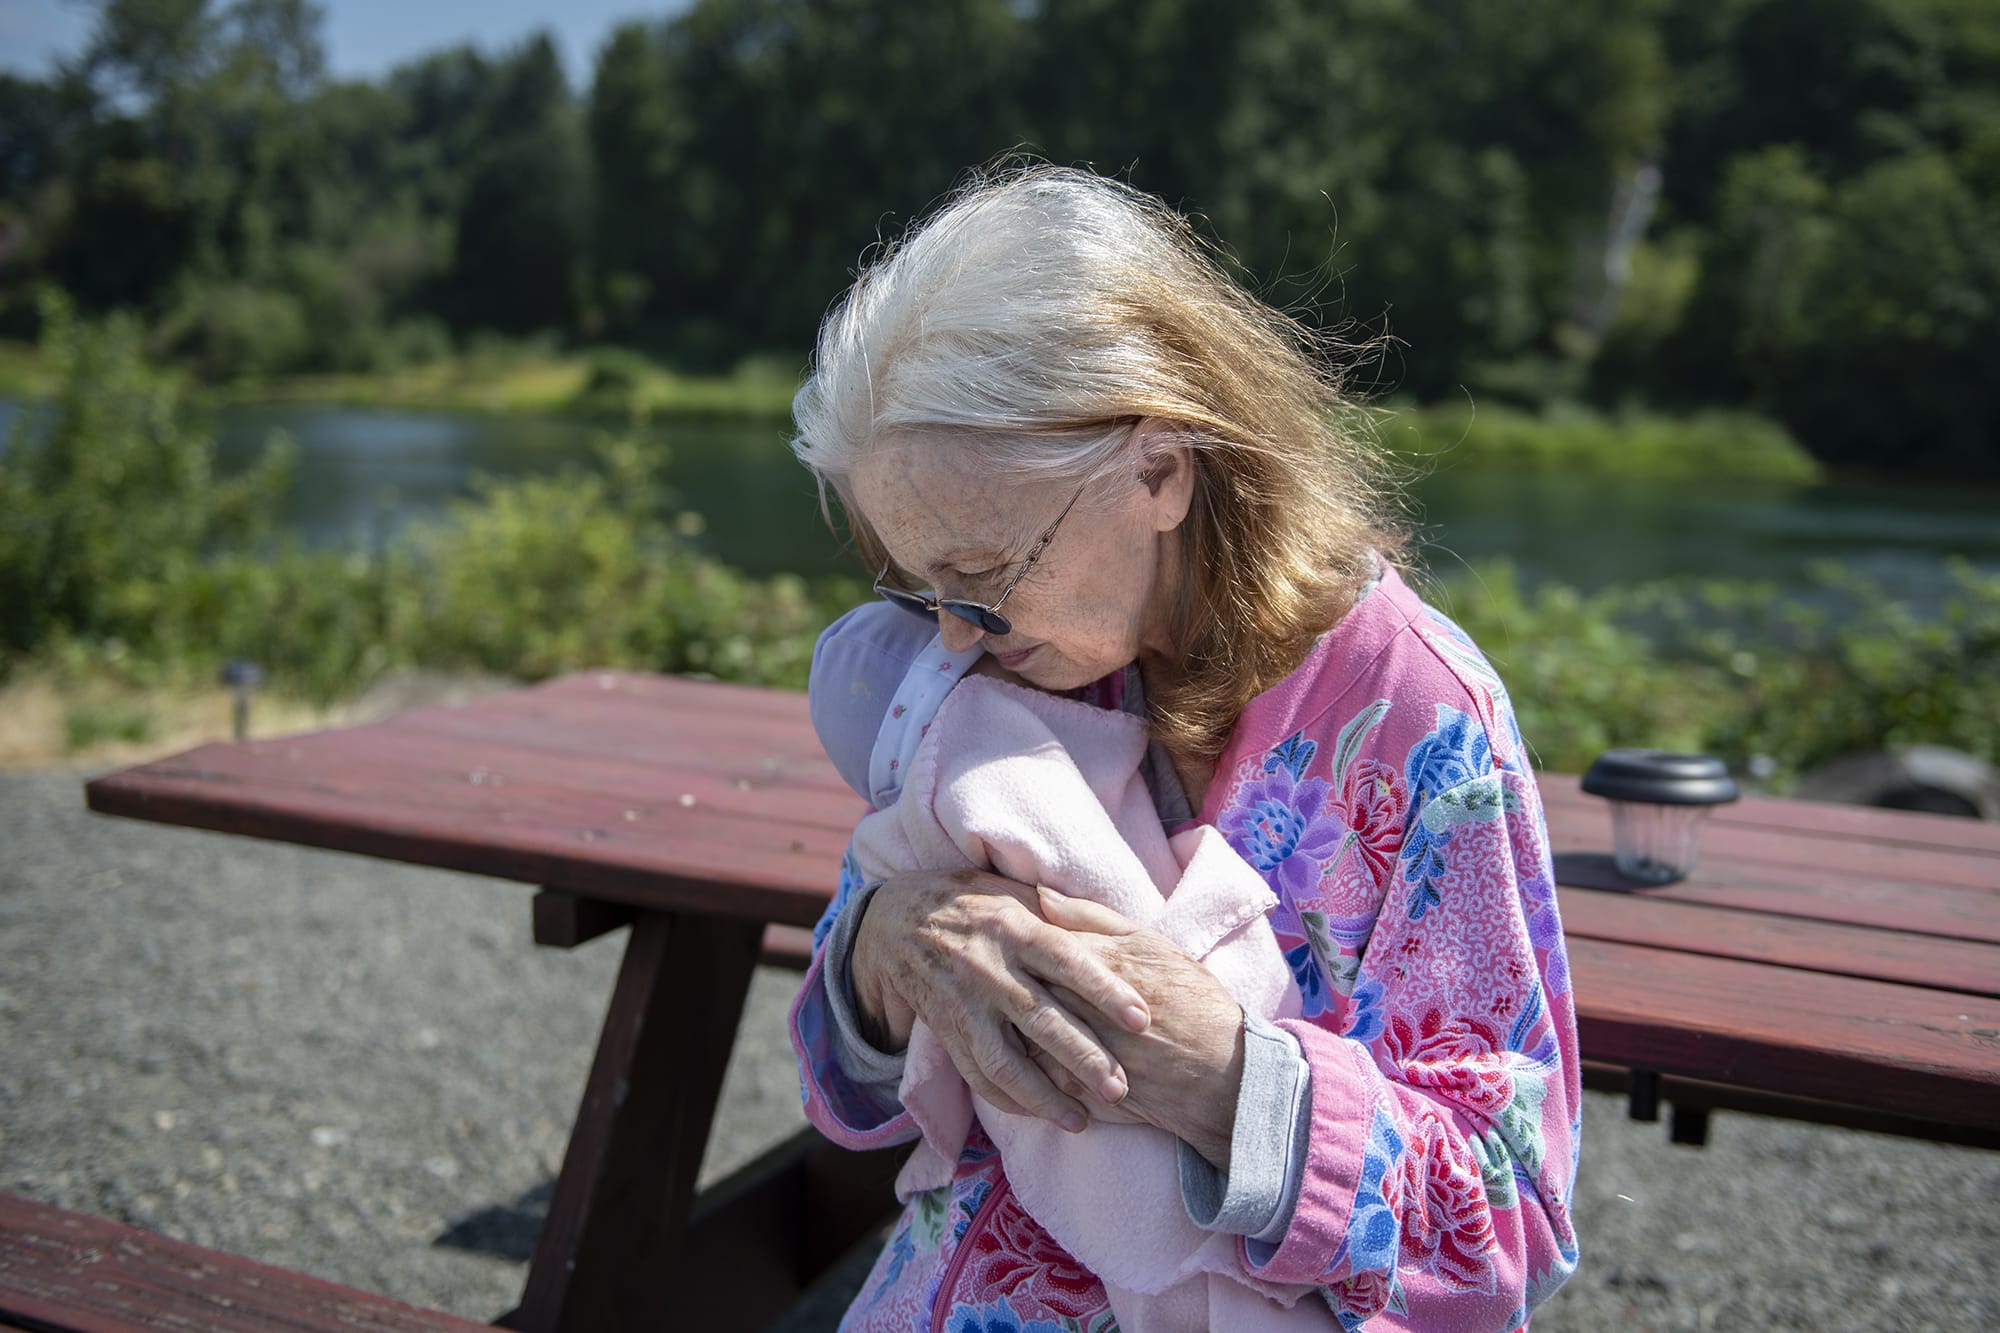 MaryAnn St. Mars affectionately holds her baby doll outside her home on Tuesday morning, August 6, 2019. MaryAnn recently received the baby doll as part of the HOPE Dementia Support Group program.